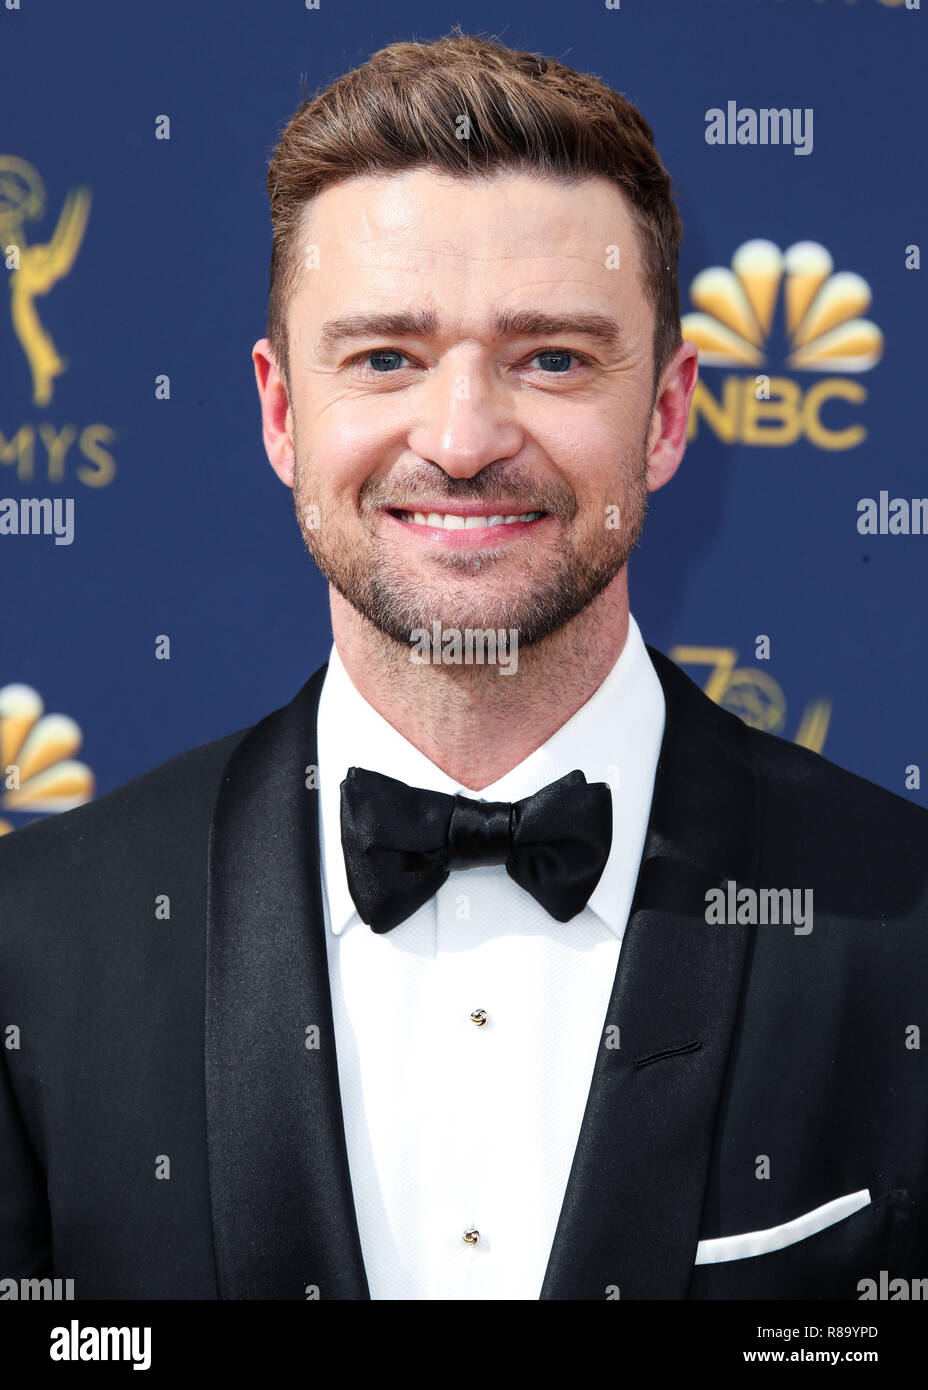 LOS ANGELES, CA, USA - SEPTEMBER 17: Justin Timberlake at the 70th Annual Primetime Emmy Awards held at Microsoft Theater at L.A. Live on September 17, 2018 in Los Angeles, California, United States. (Photo by Xavier Collin/Image Press Agency) Stock Photo